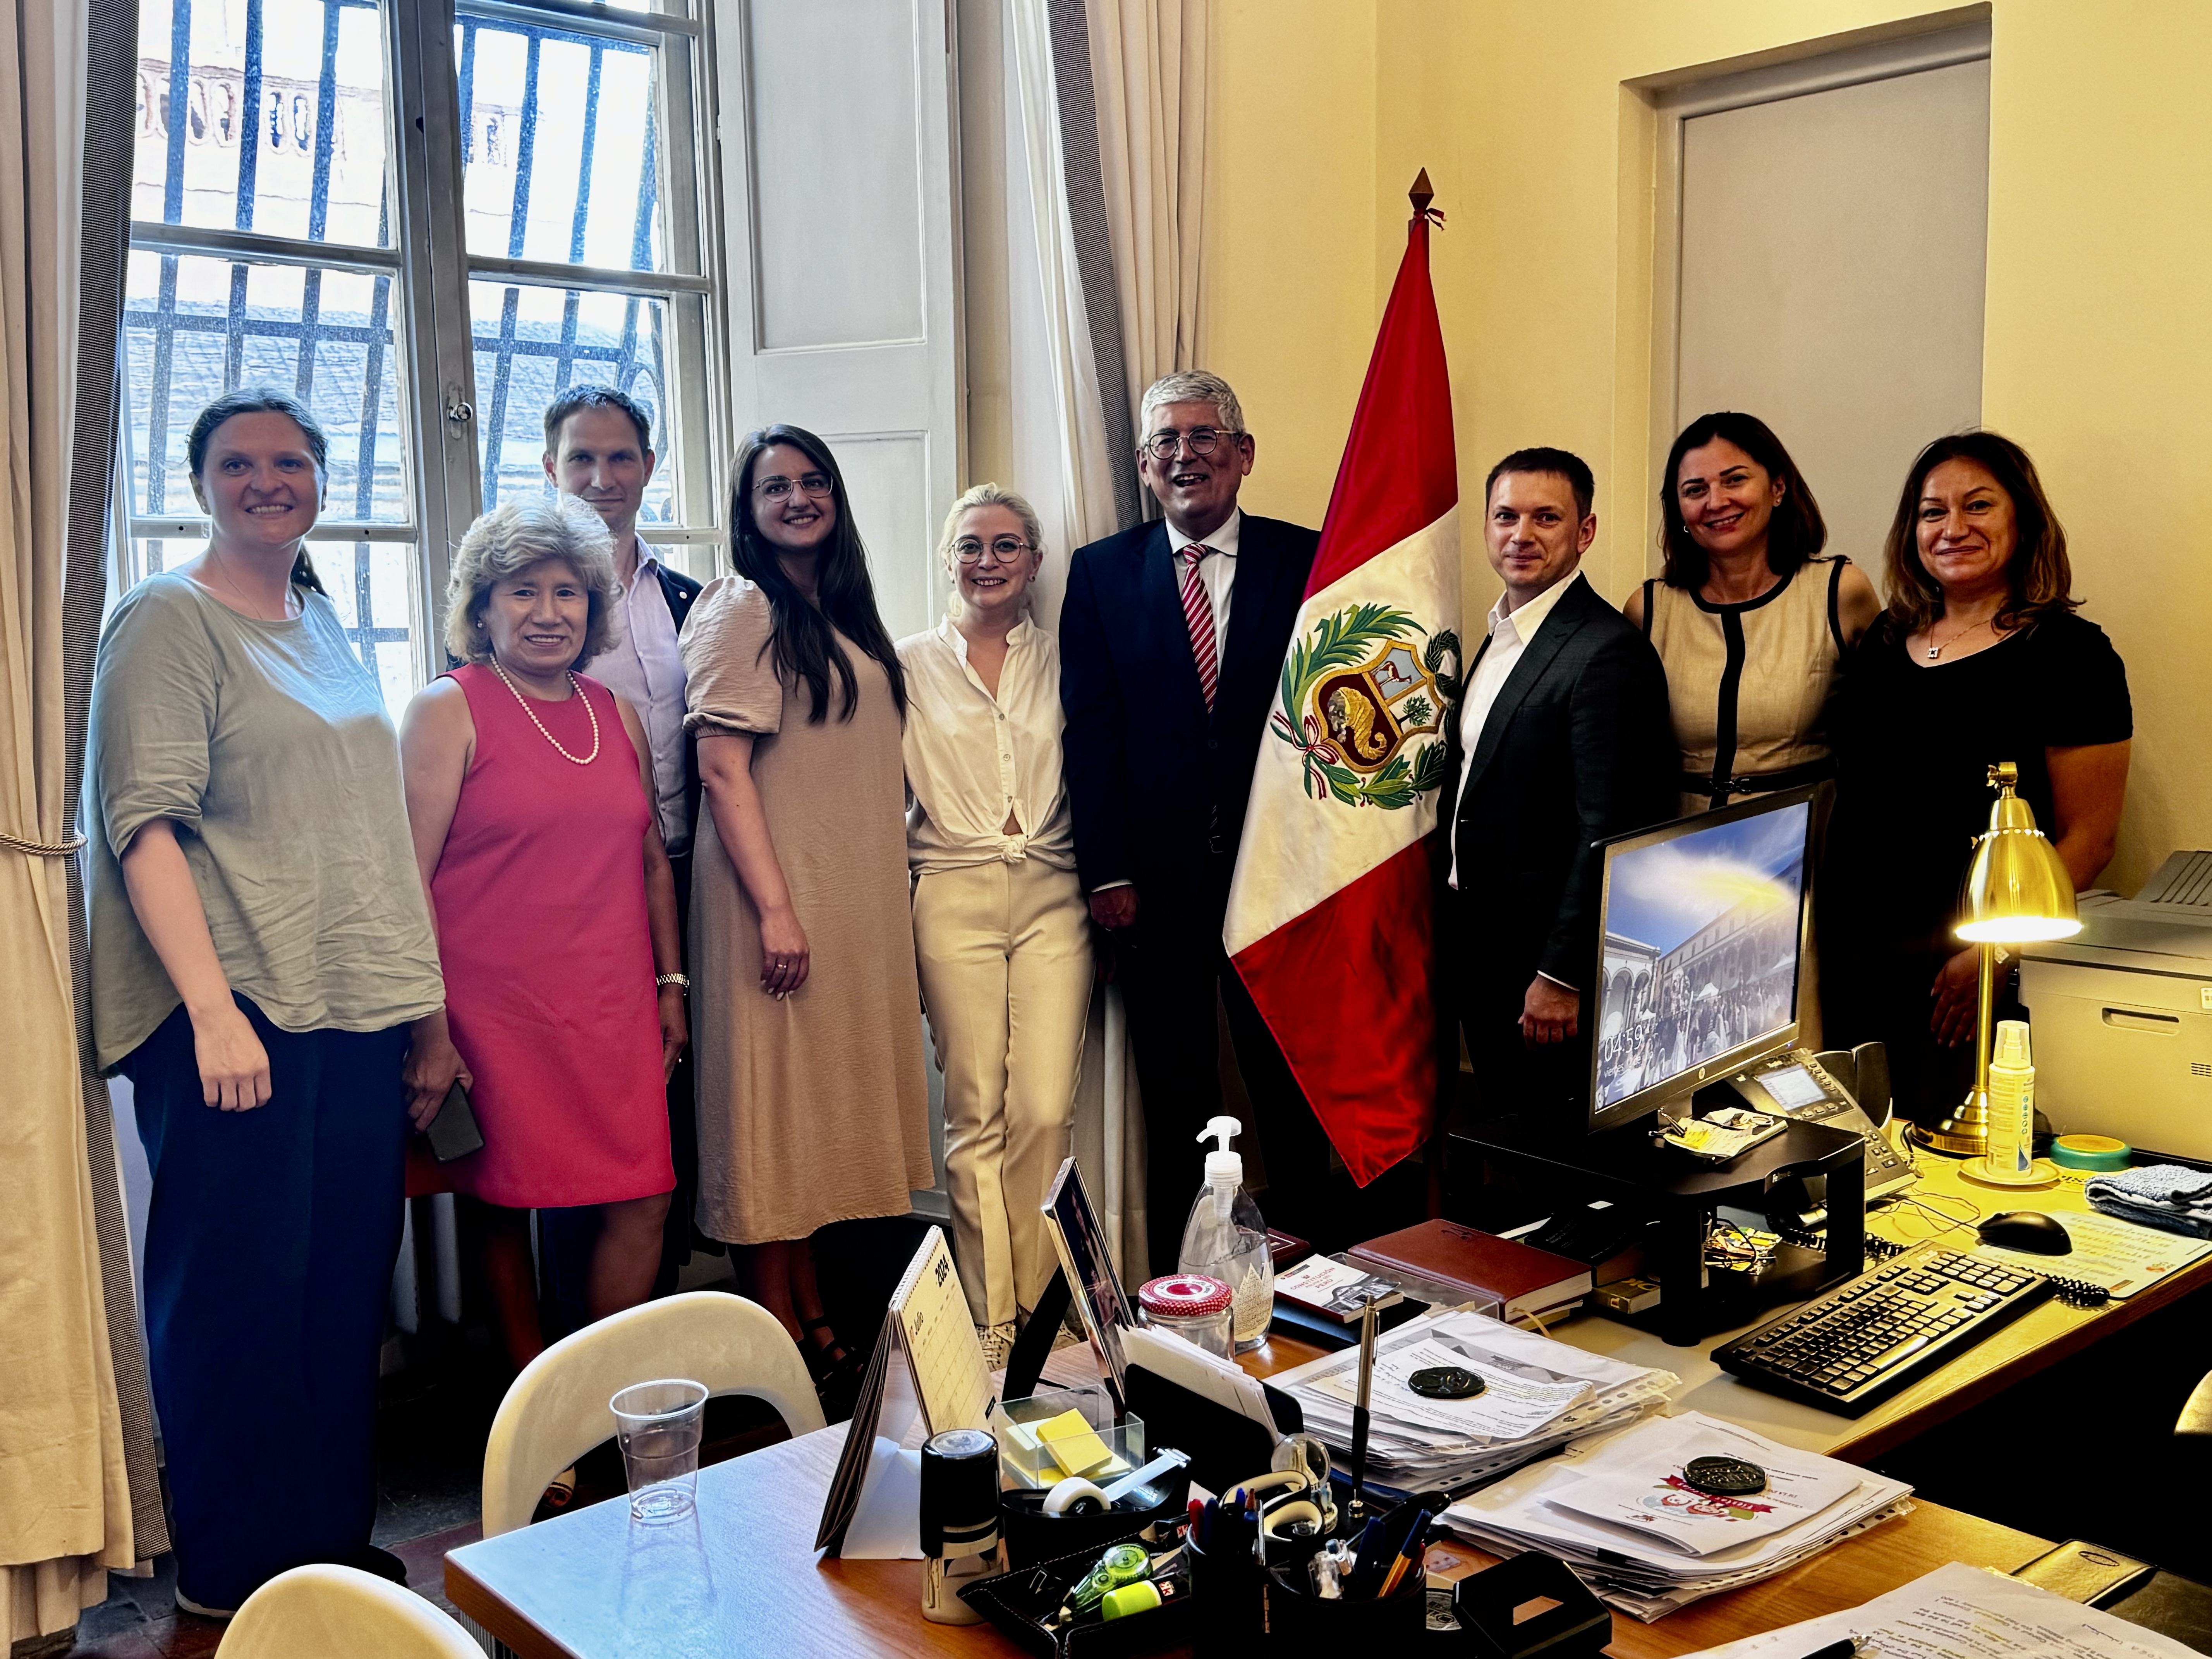 Meeting with the Peruvian consulate and its diaspora